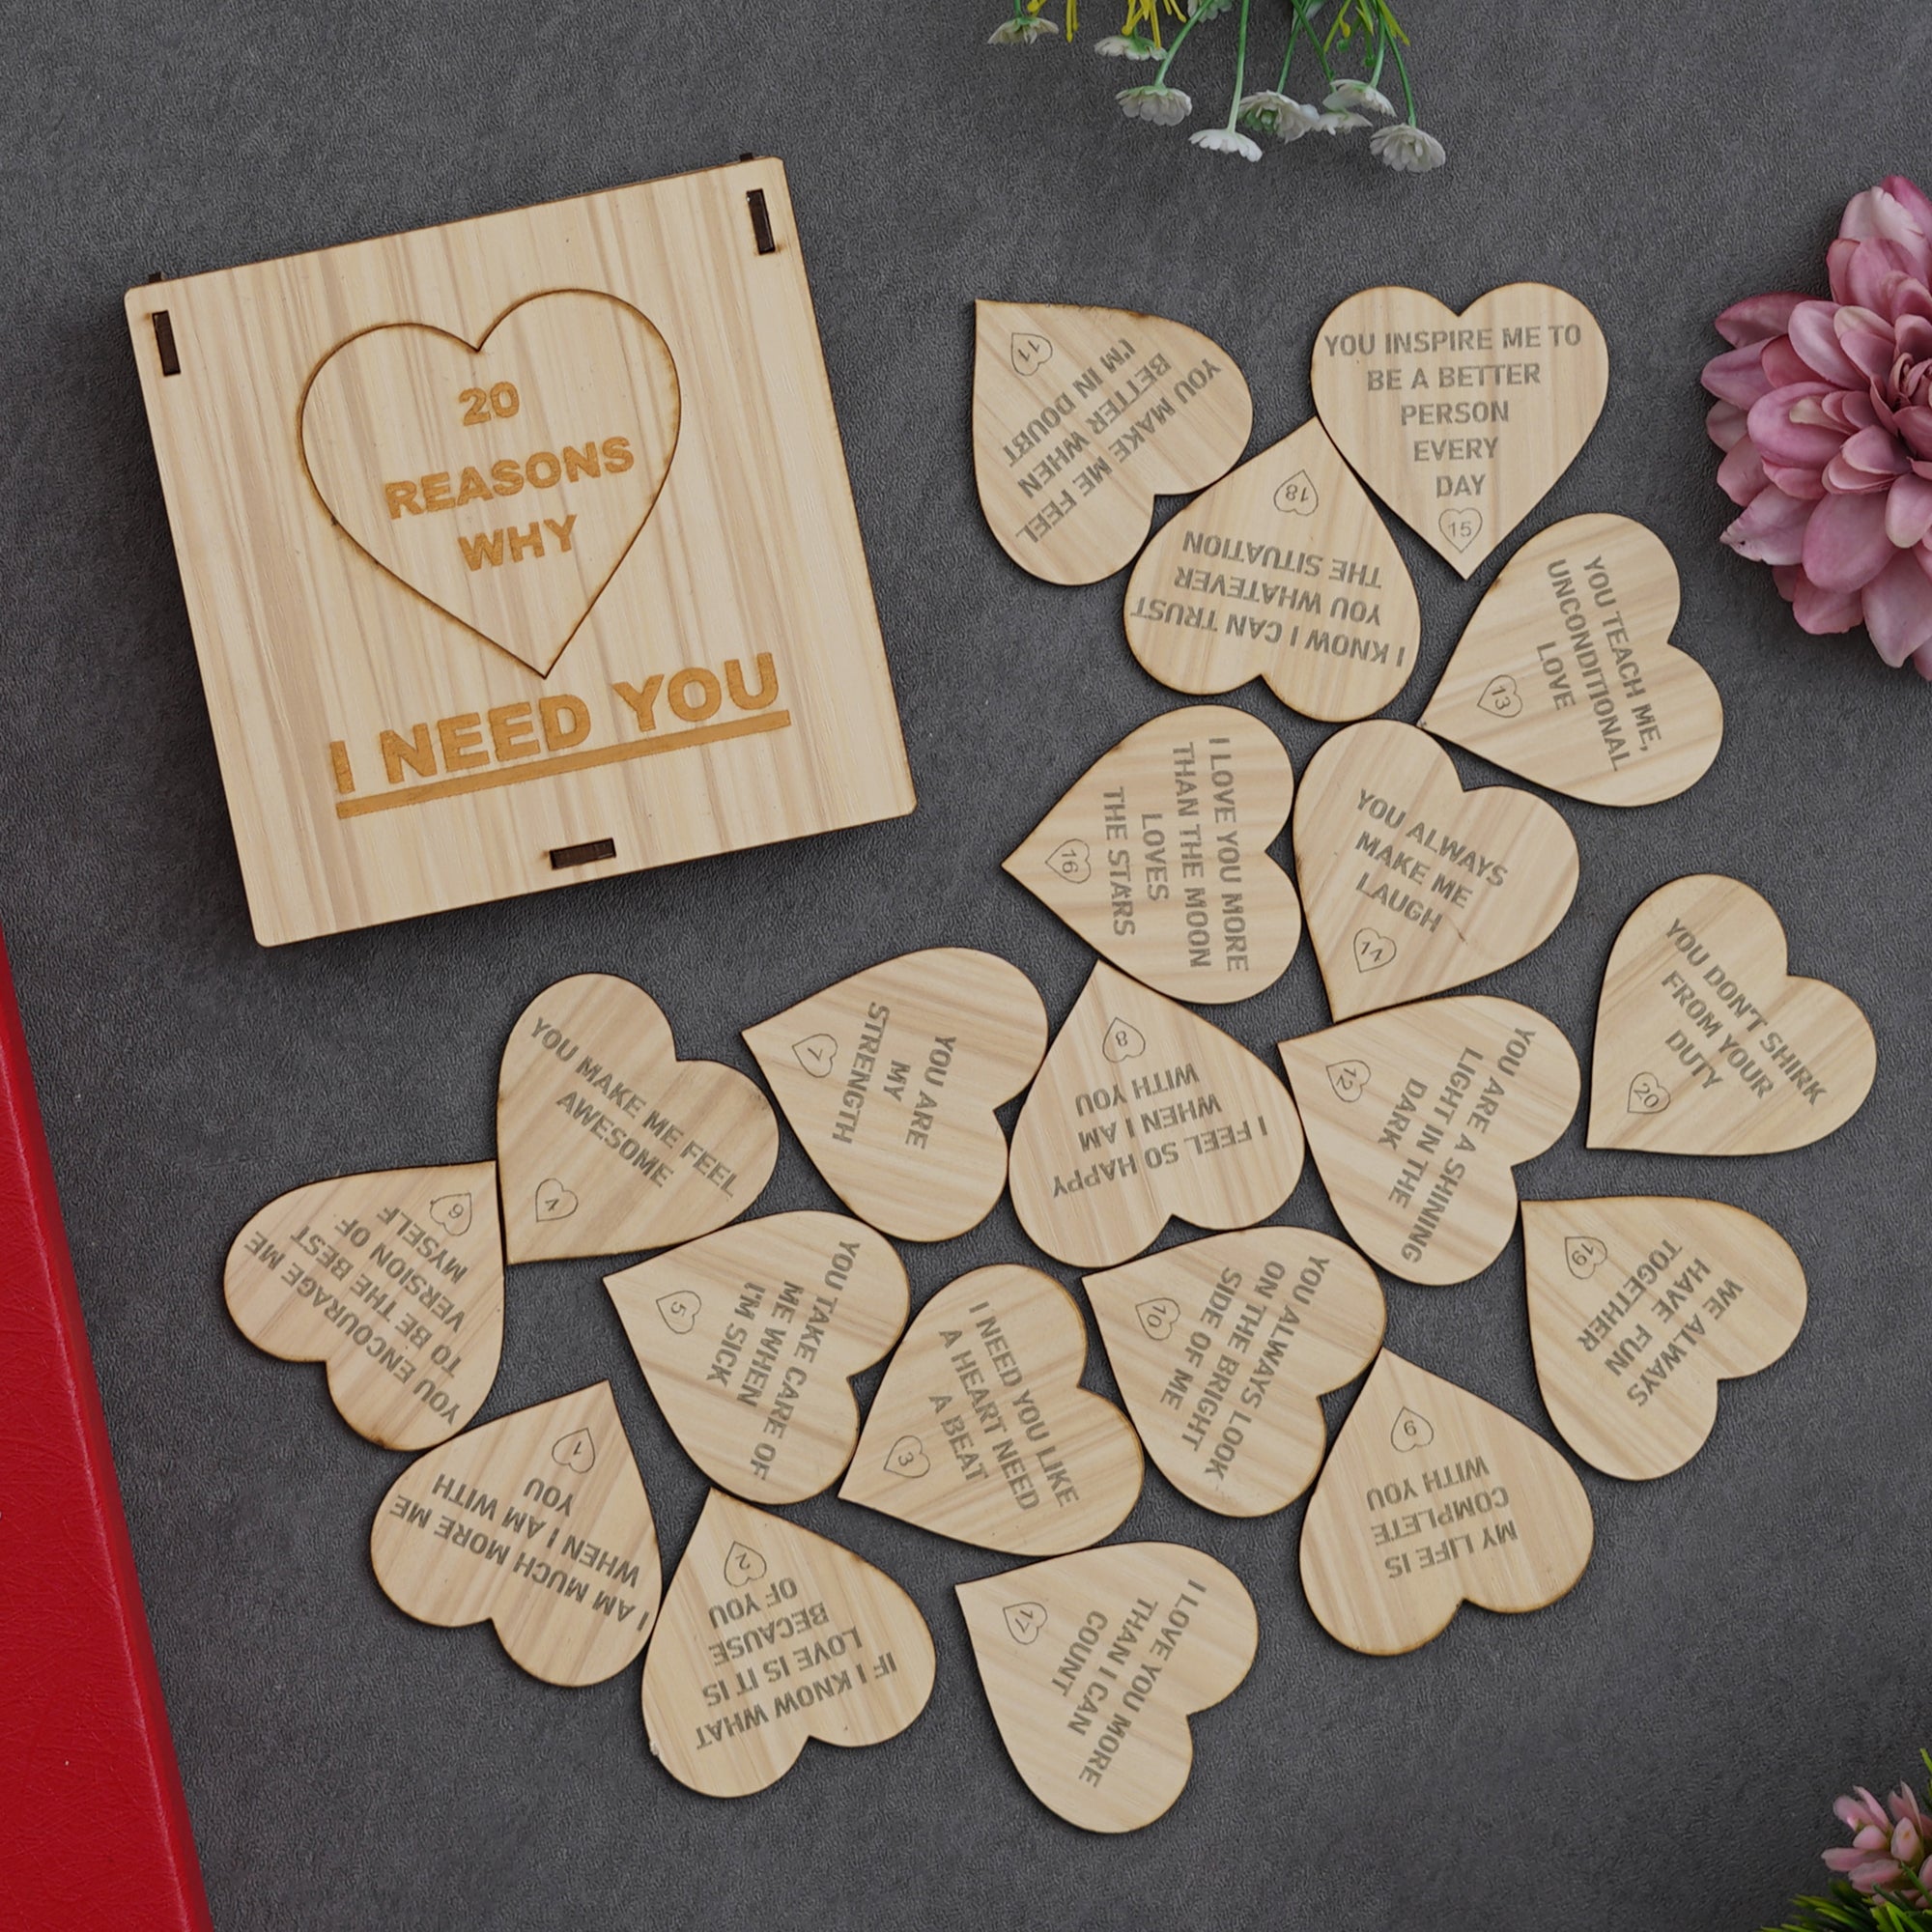 Valentine Combo of Pack of 12 Love Coupons Gift Cards Set, "20 Reasons Why I Need You" Printed on Little Hearts Wooden Gift Set 3